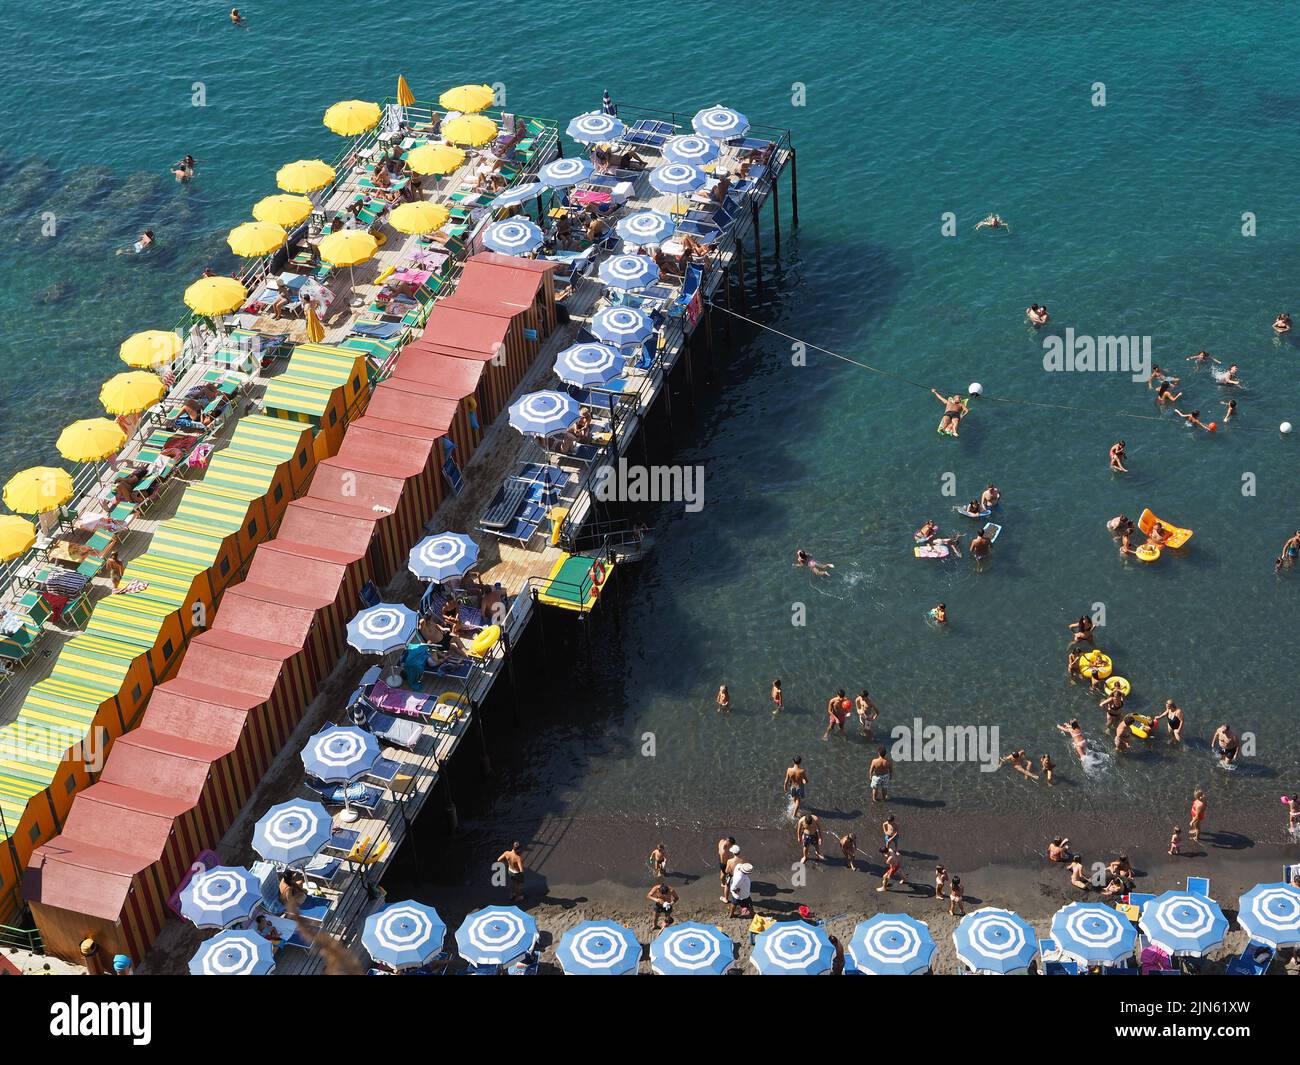 The small beach in Sorrento, Campania, Italy, is extended using piers like this one. Stock Photo